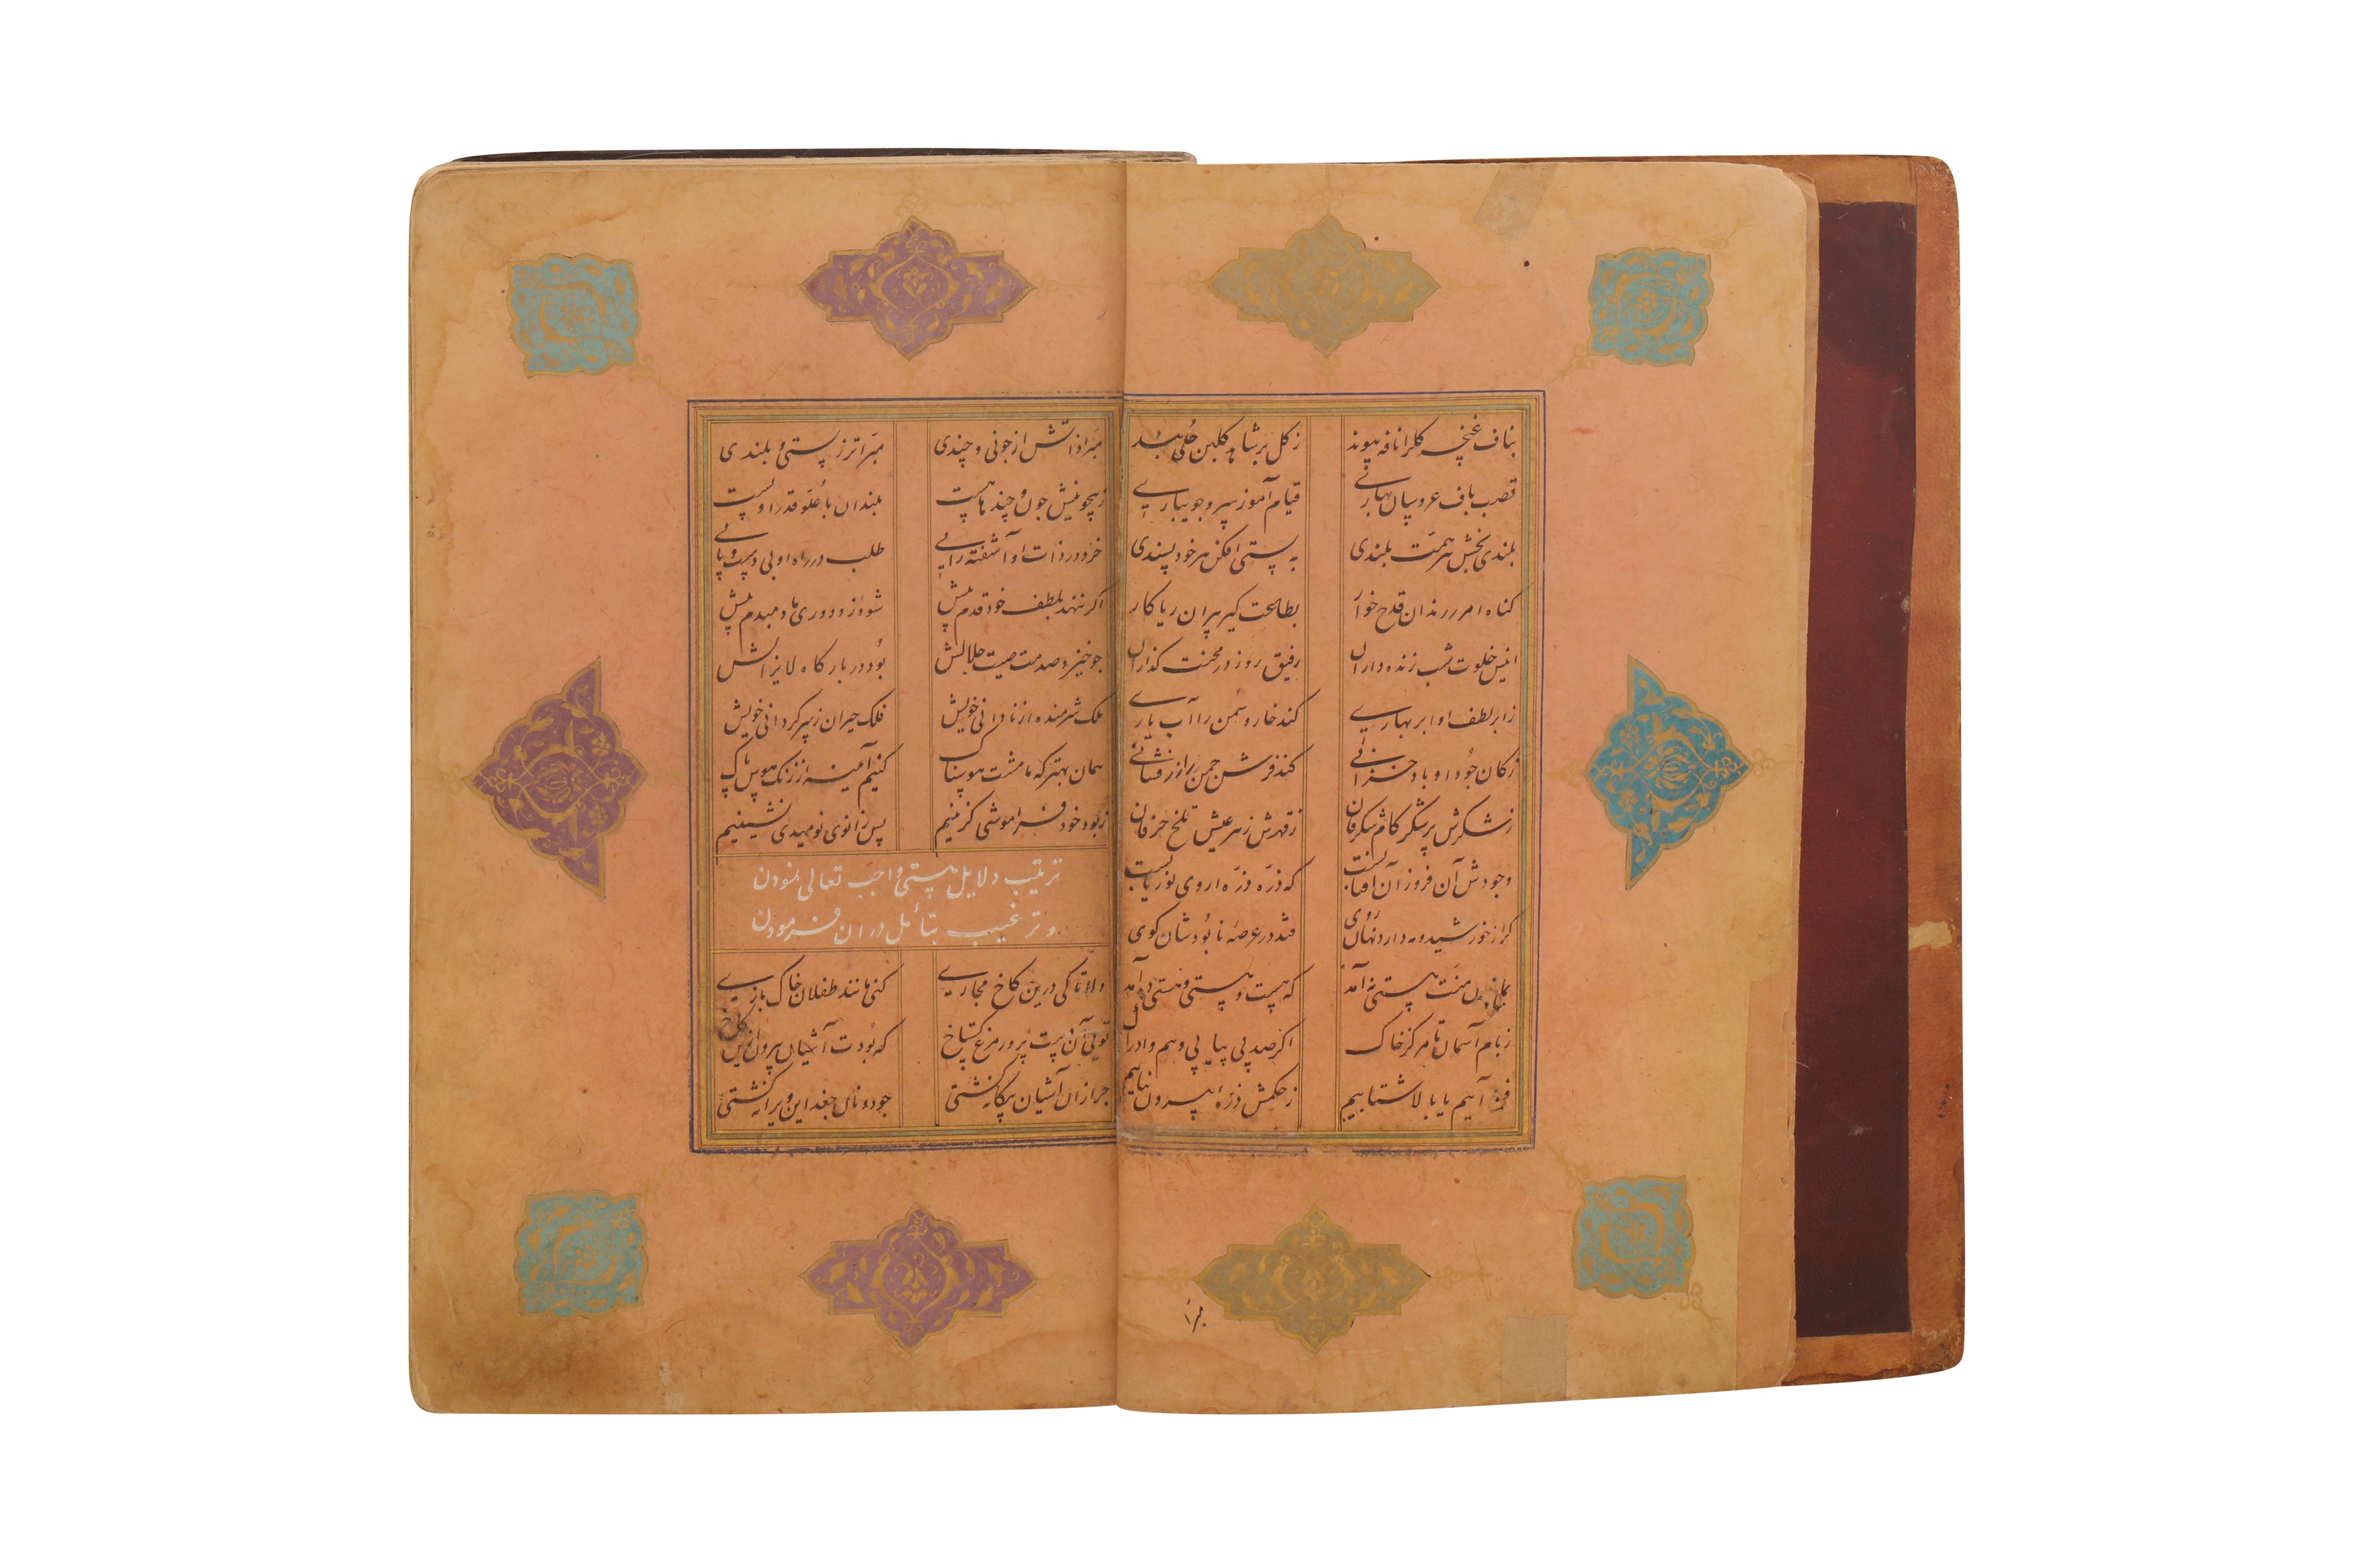 A LATE 16TH/EARLY 17TH CENTURY PERSIAN POETIC MANUSCRIPT - YOUSUF AND ZULAIKA, HAFT AWRANG OF JAMI - Image 2 of 6